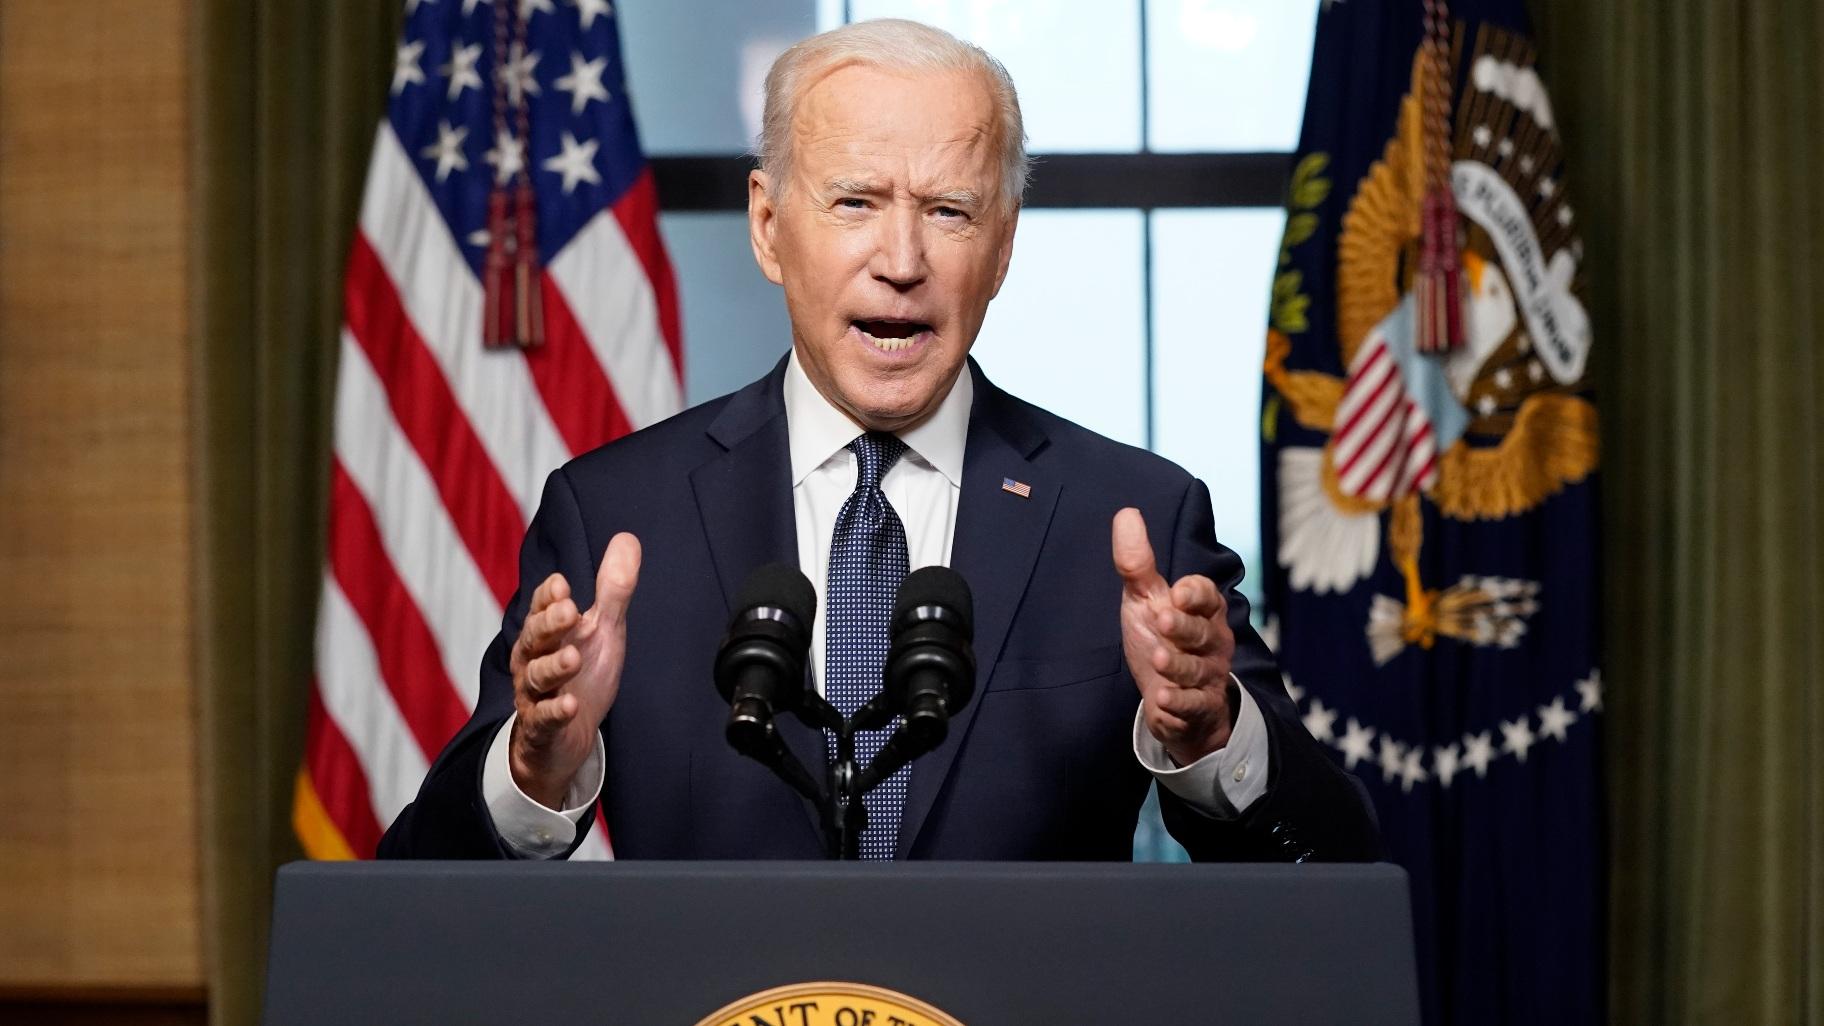 President Joe Biden speaks from the Treaty Room in the White House on April 14, 2021, about the withdrawal of the remainder of U.S. troops from Afghanistan. (AP Photo / Andrew Harnik, Pool, File)